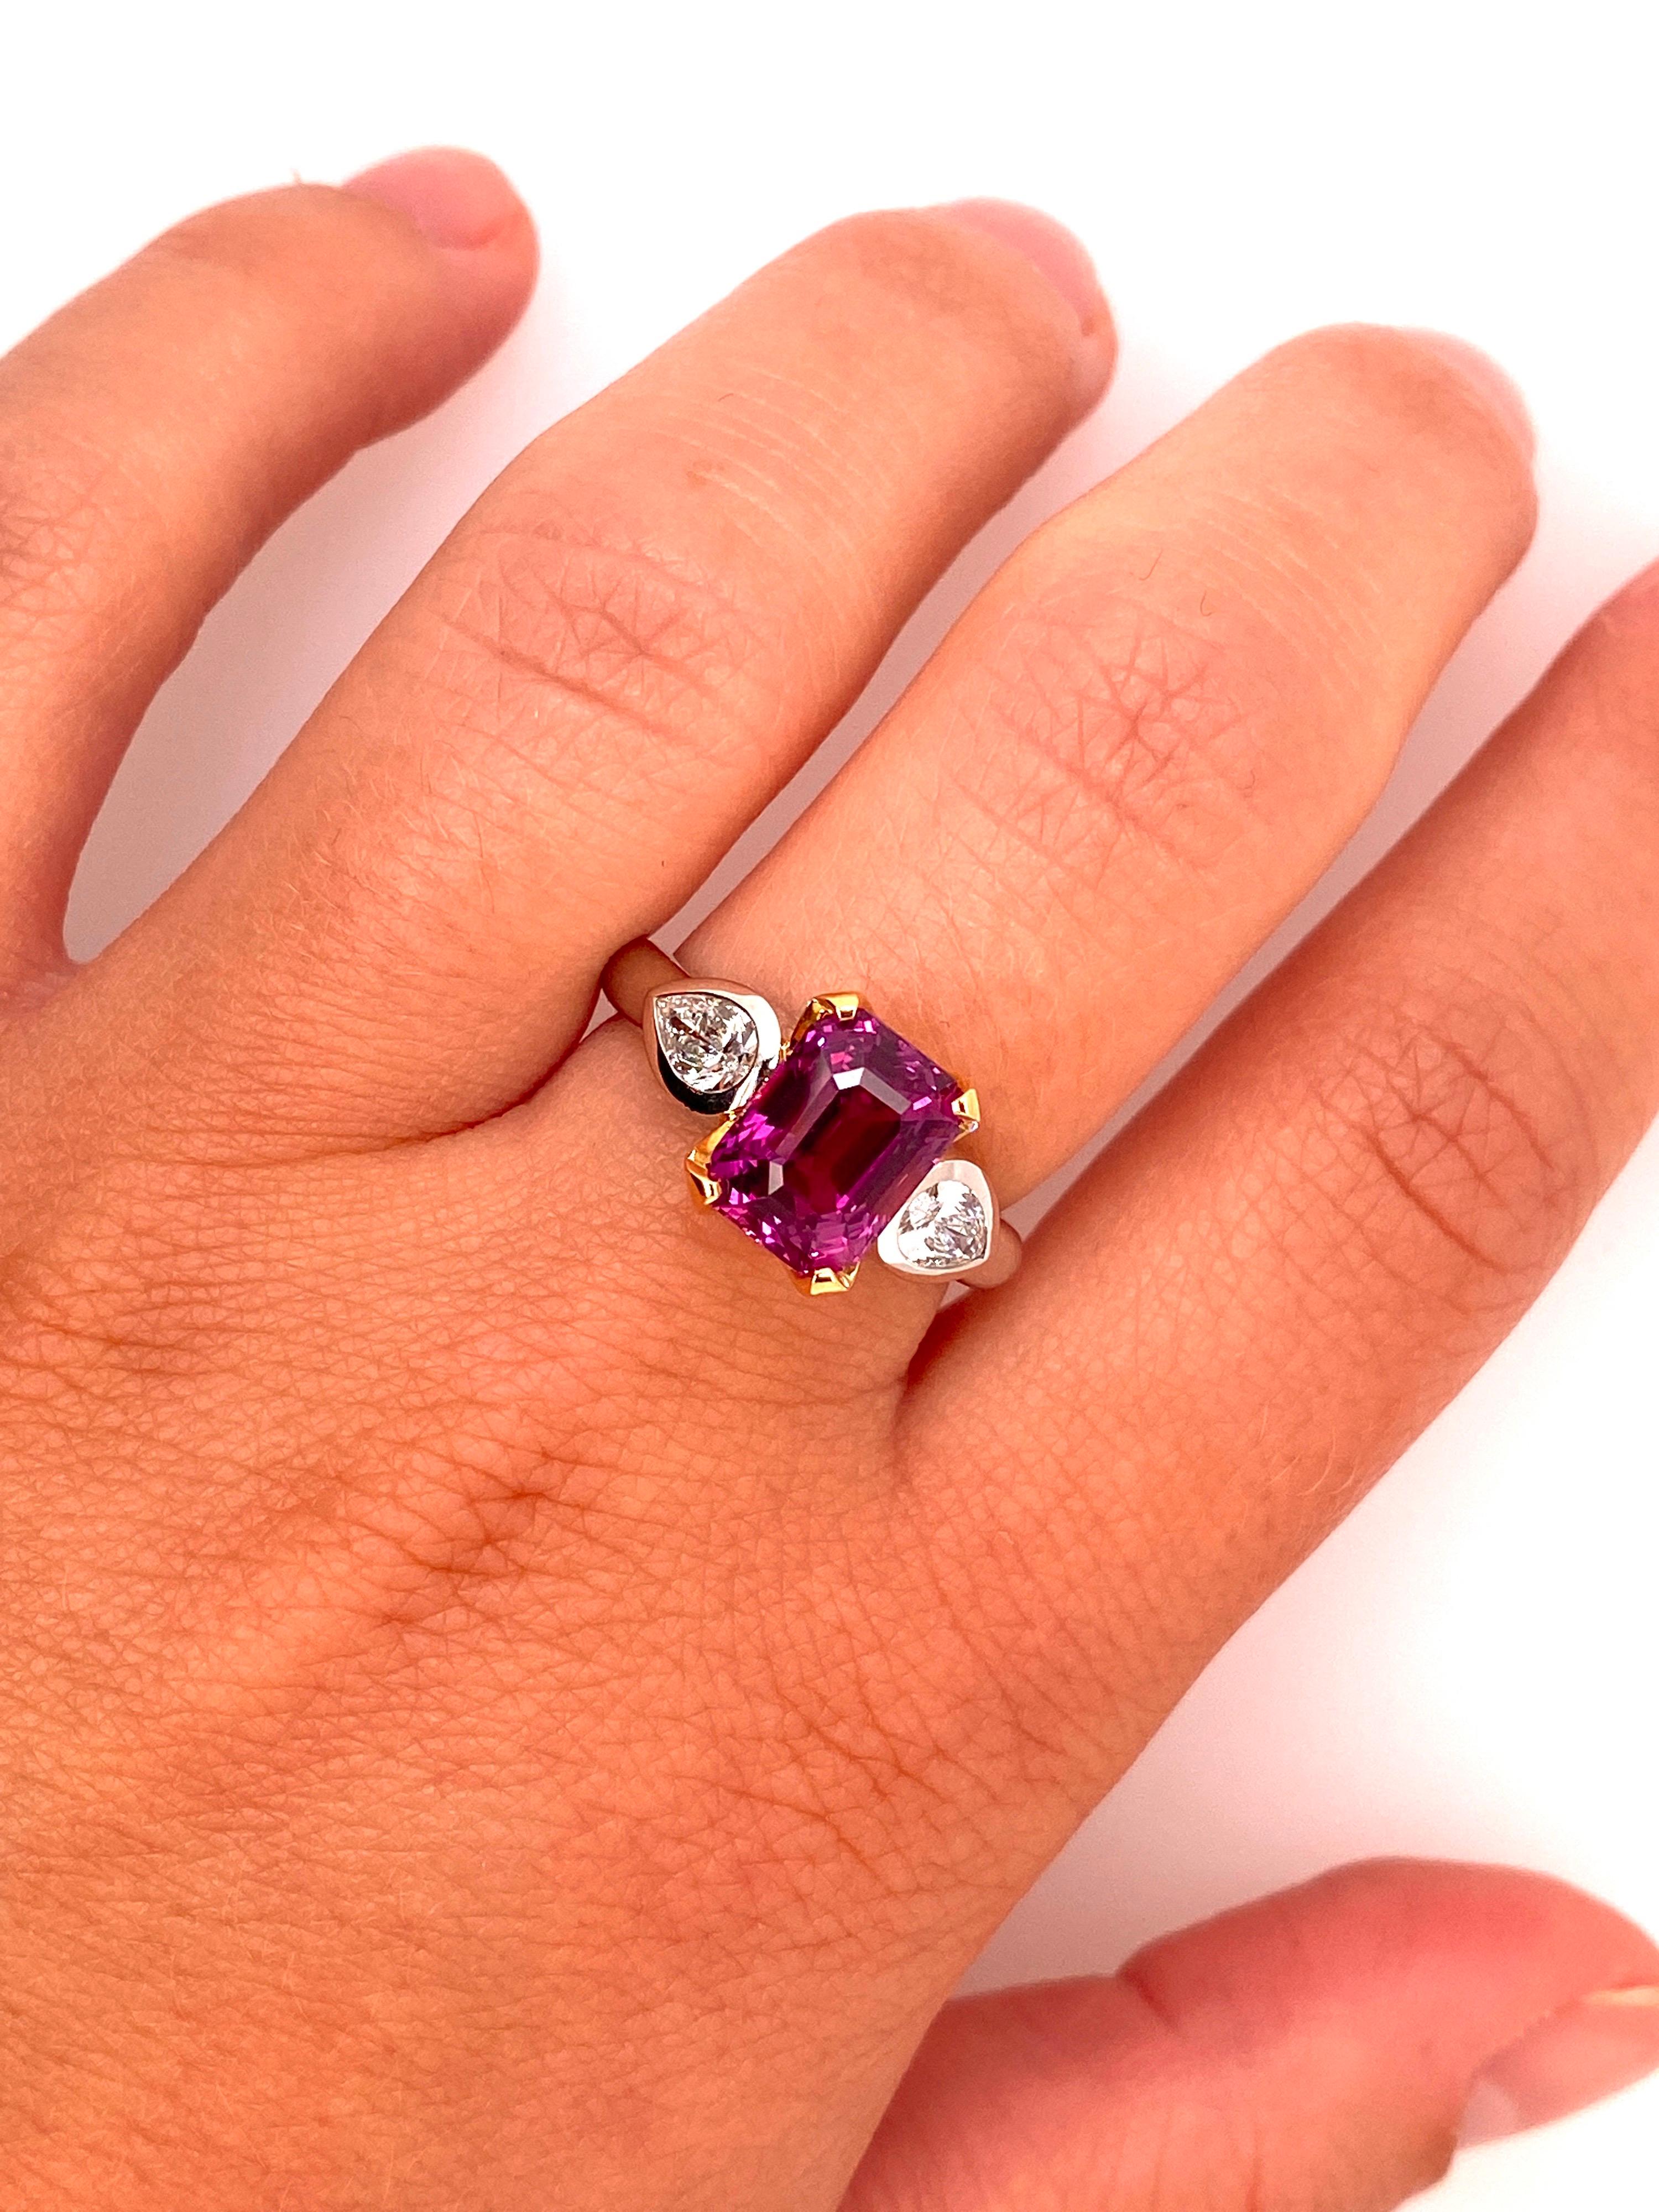 Cushion Cut 4.04 Carat Emerald Cut Pink Sapphire and Diamond Platinum and 18k Ring For Sale